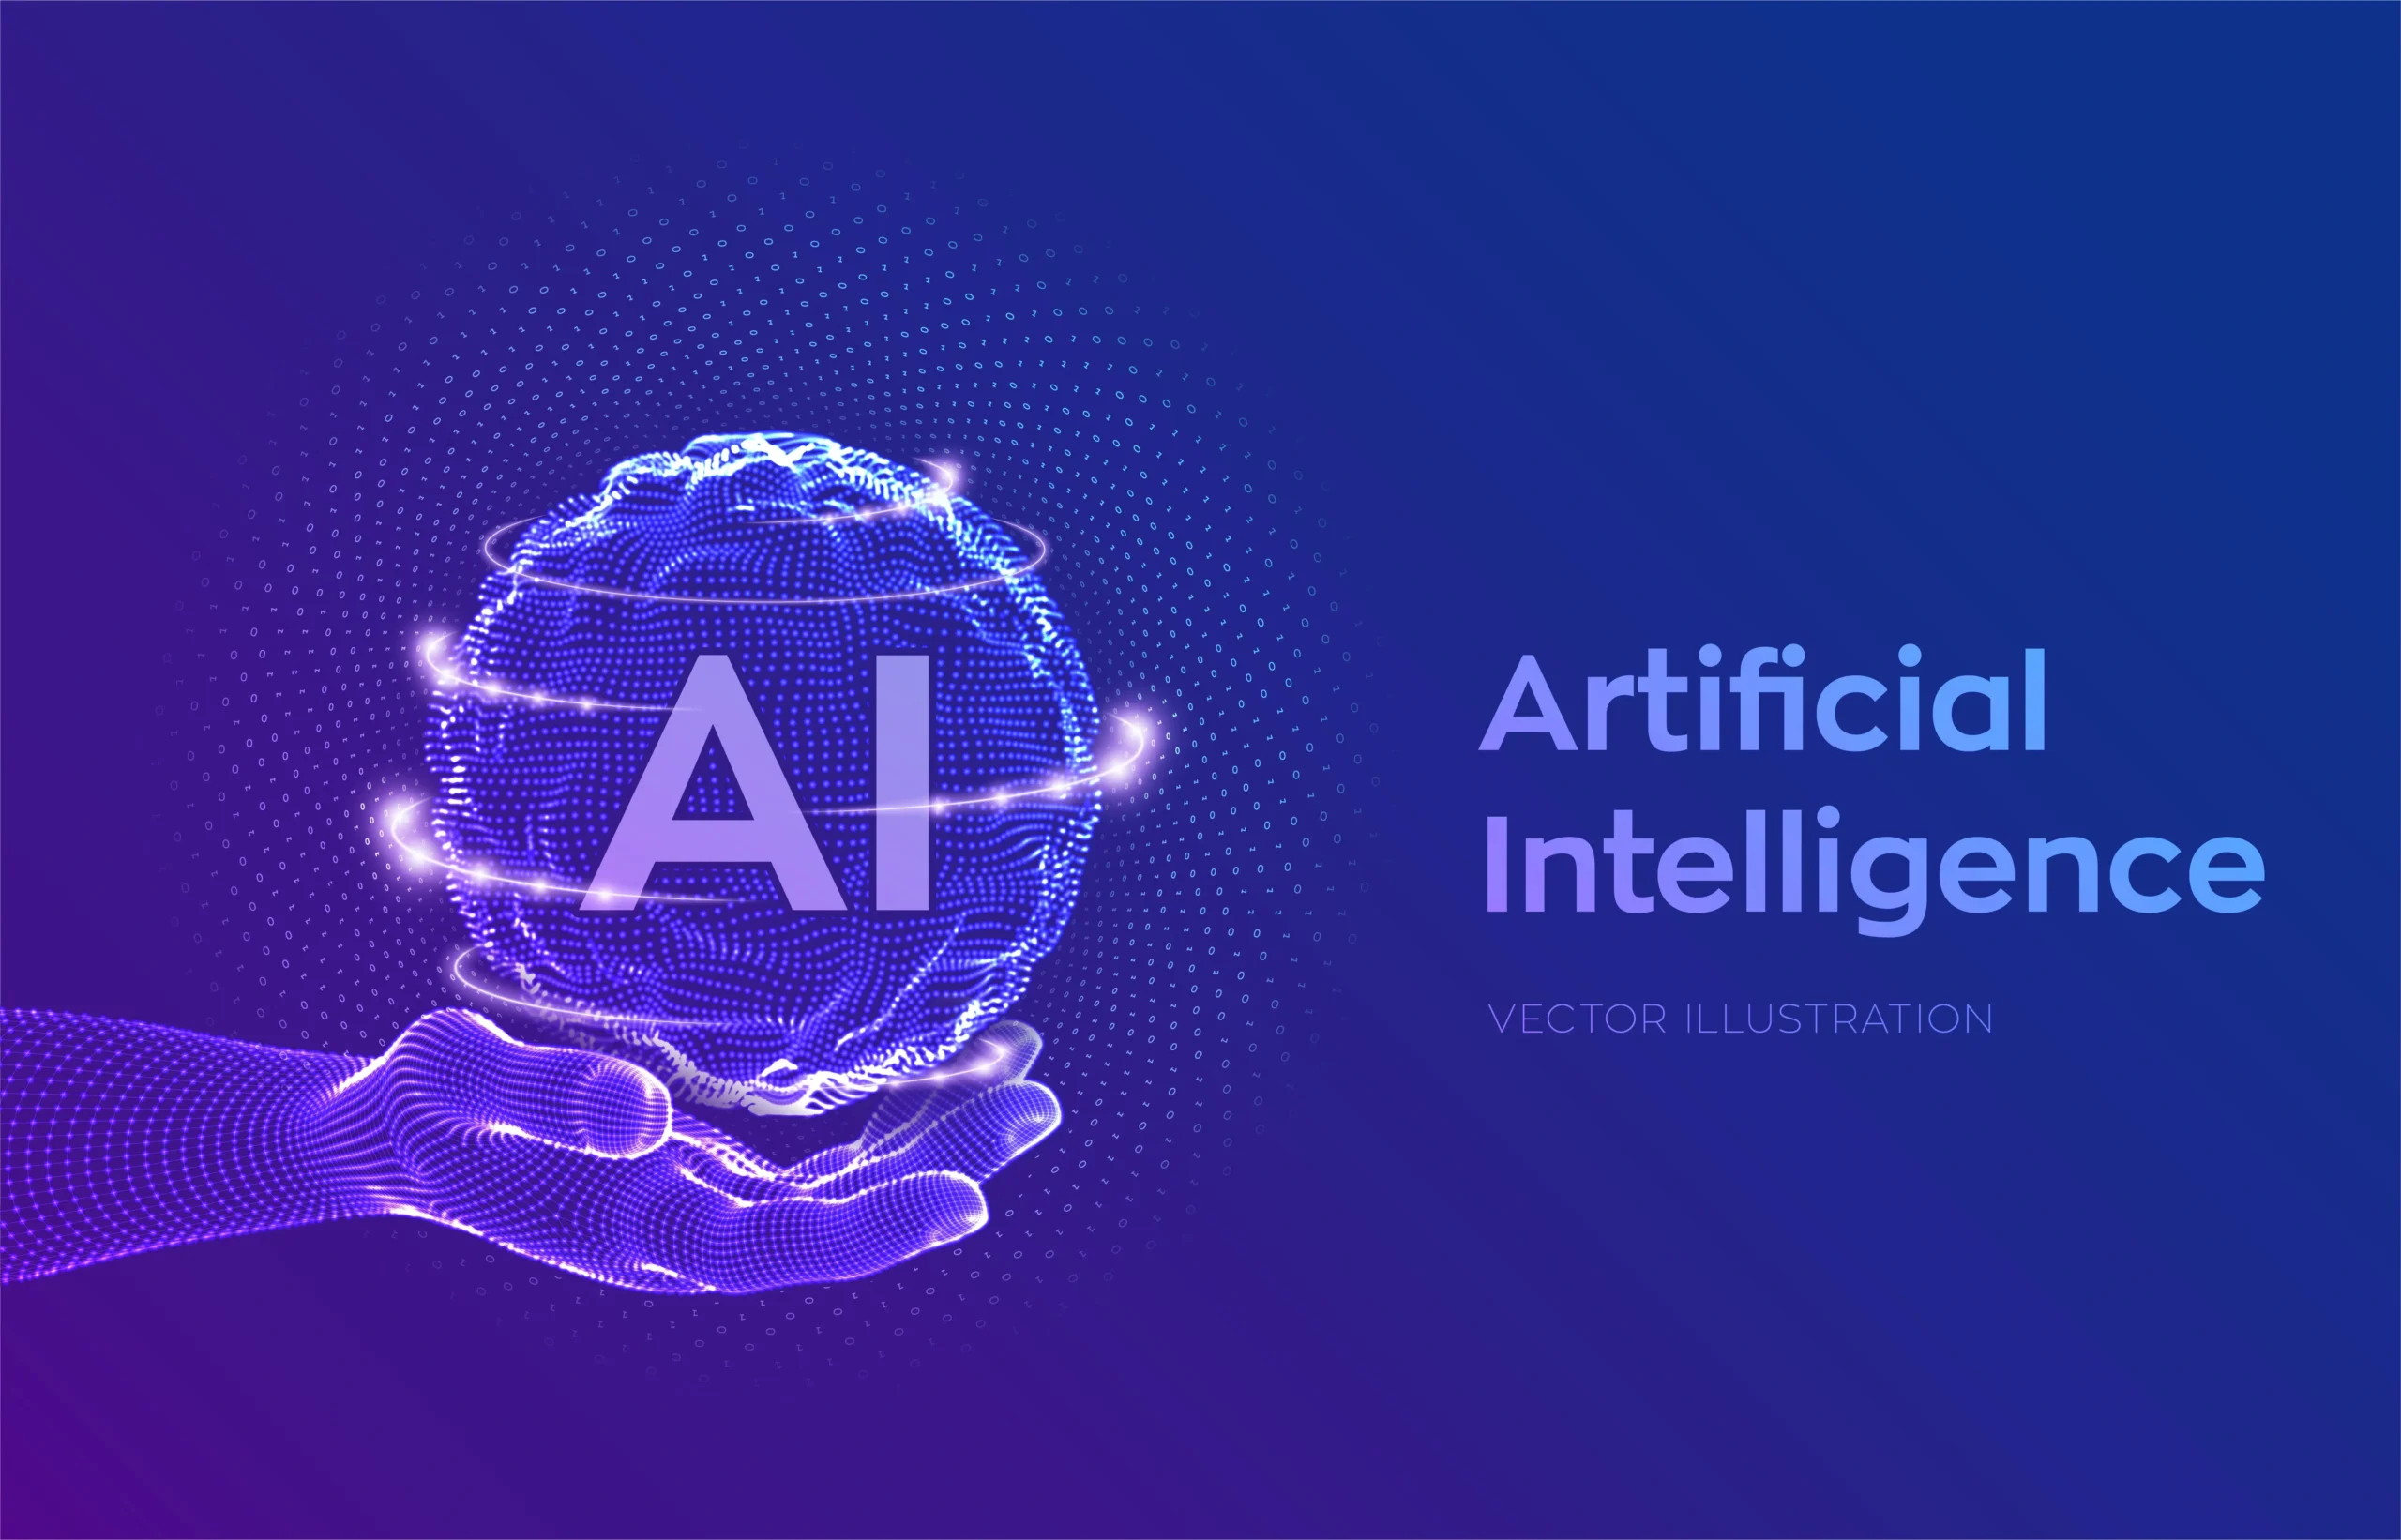 Artificial intelligence risks and benefits